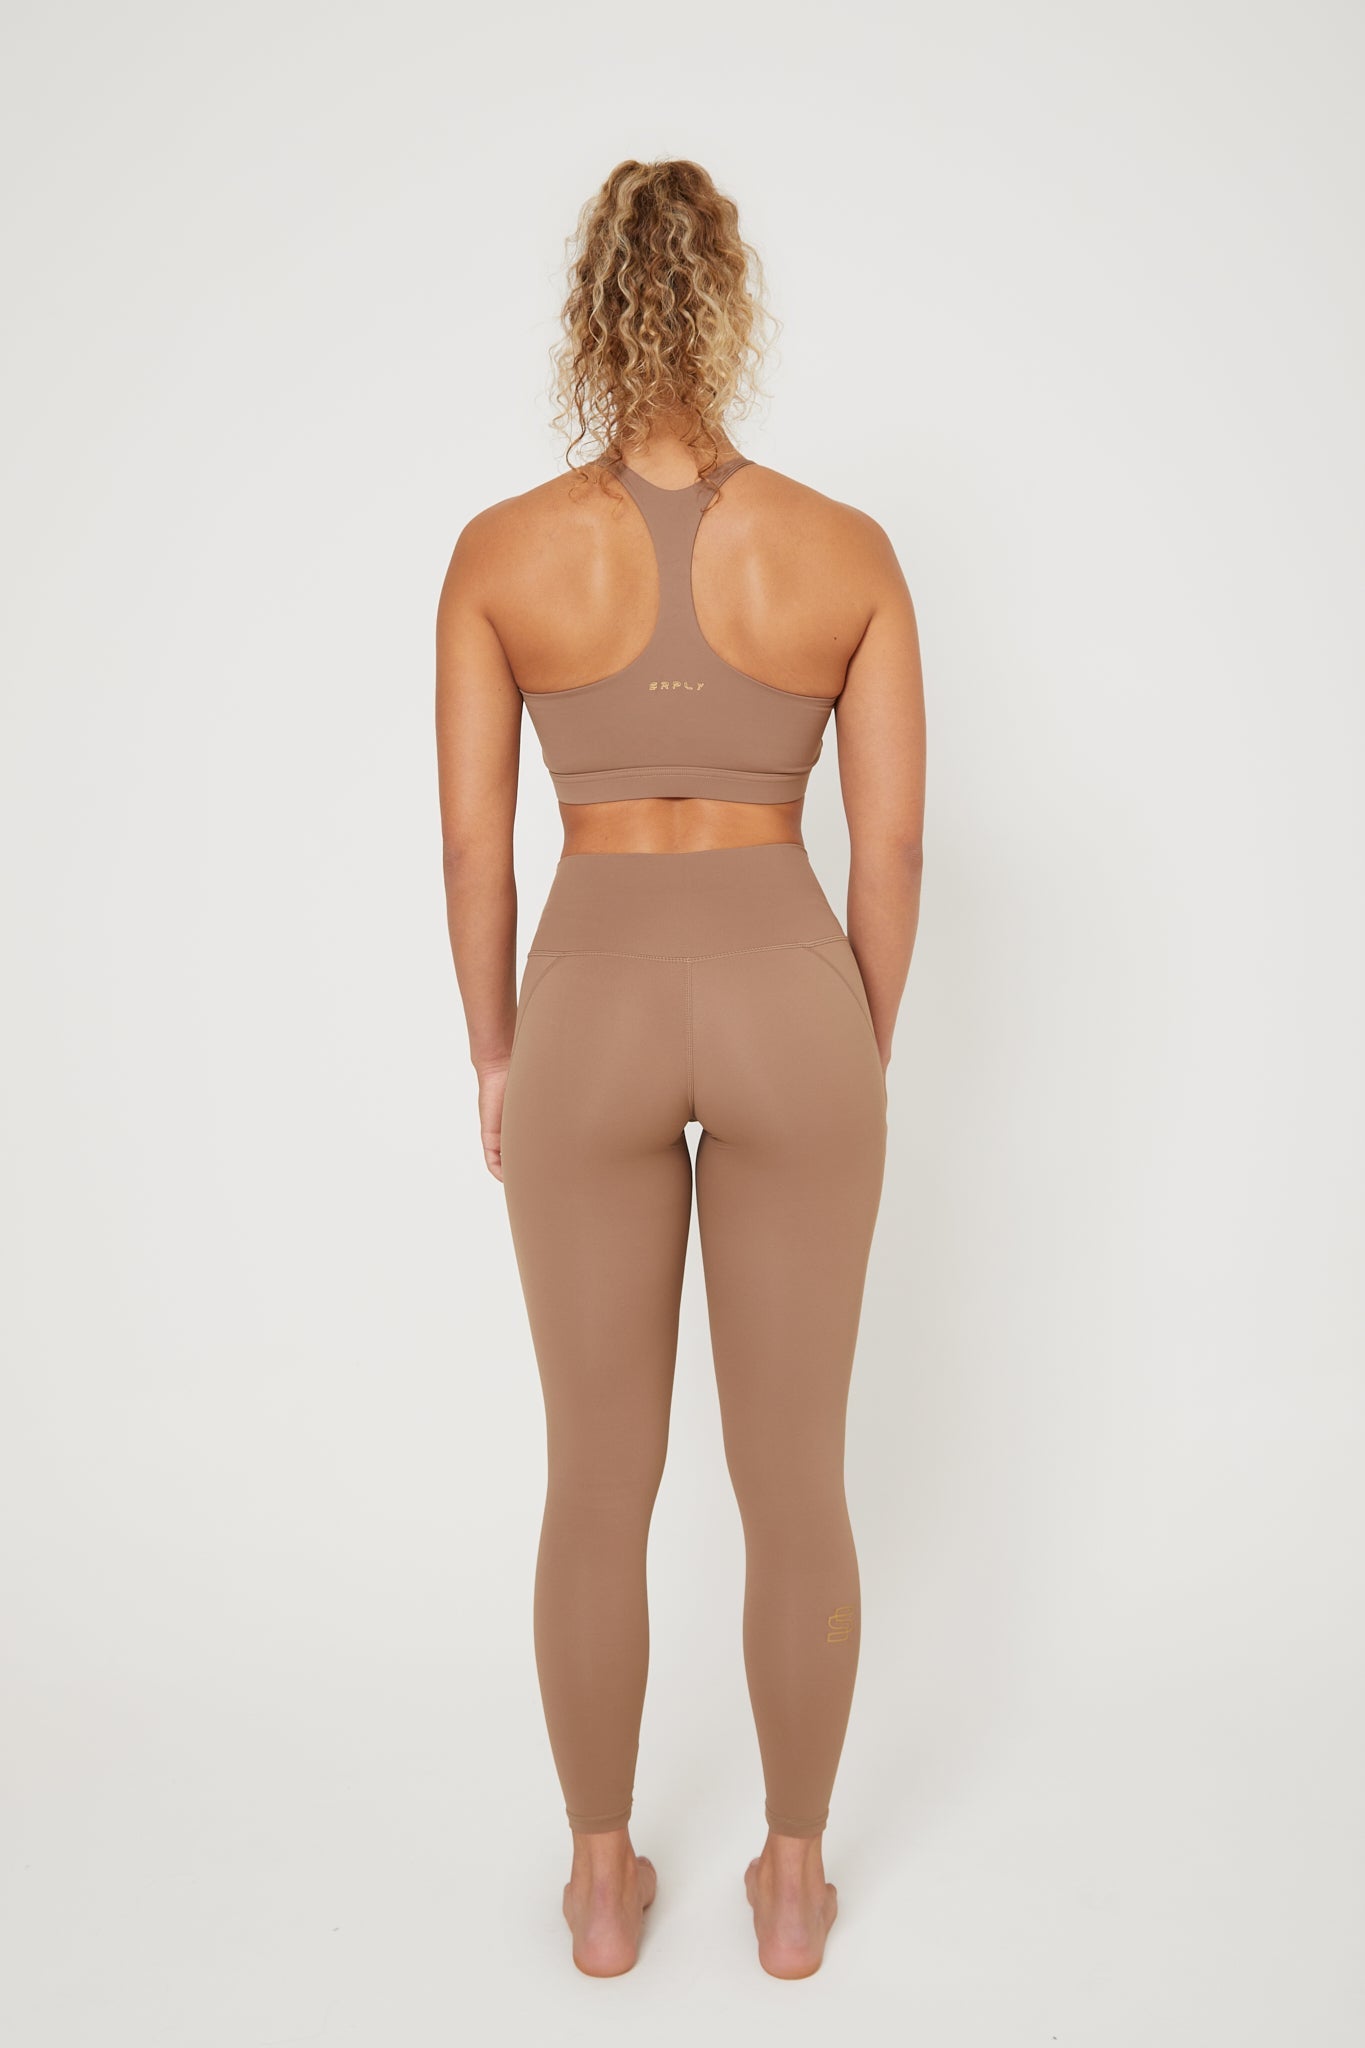 Copper Racer Back Sports Bra (Limited Edition) - SRPLY